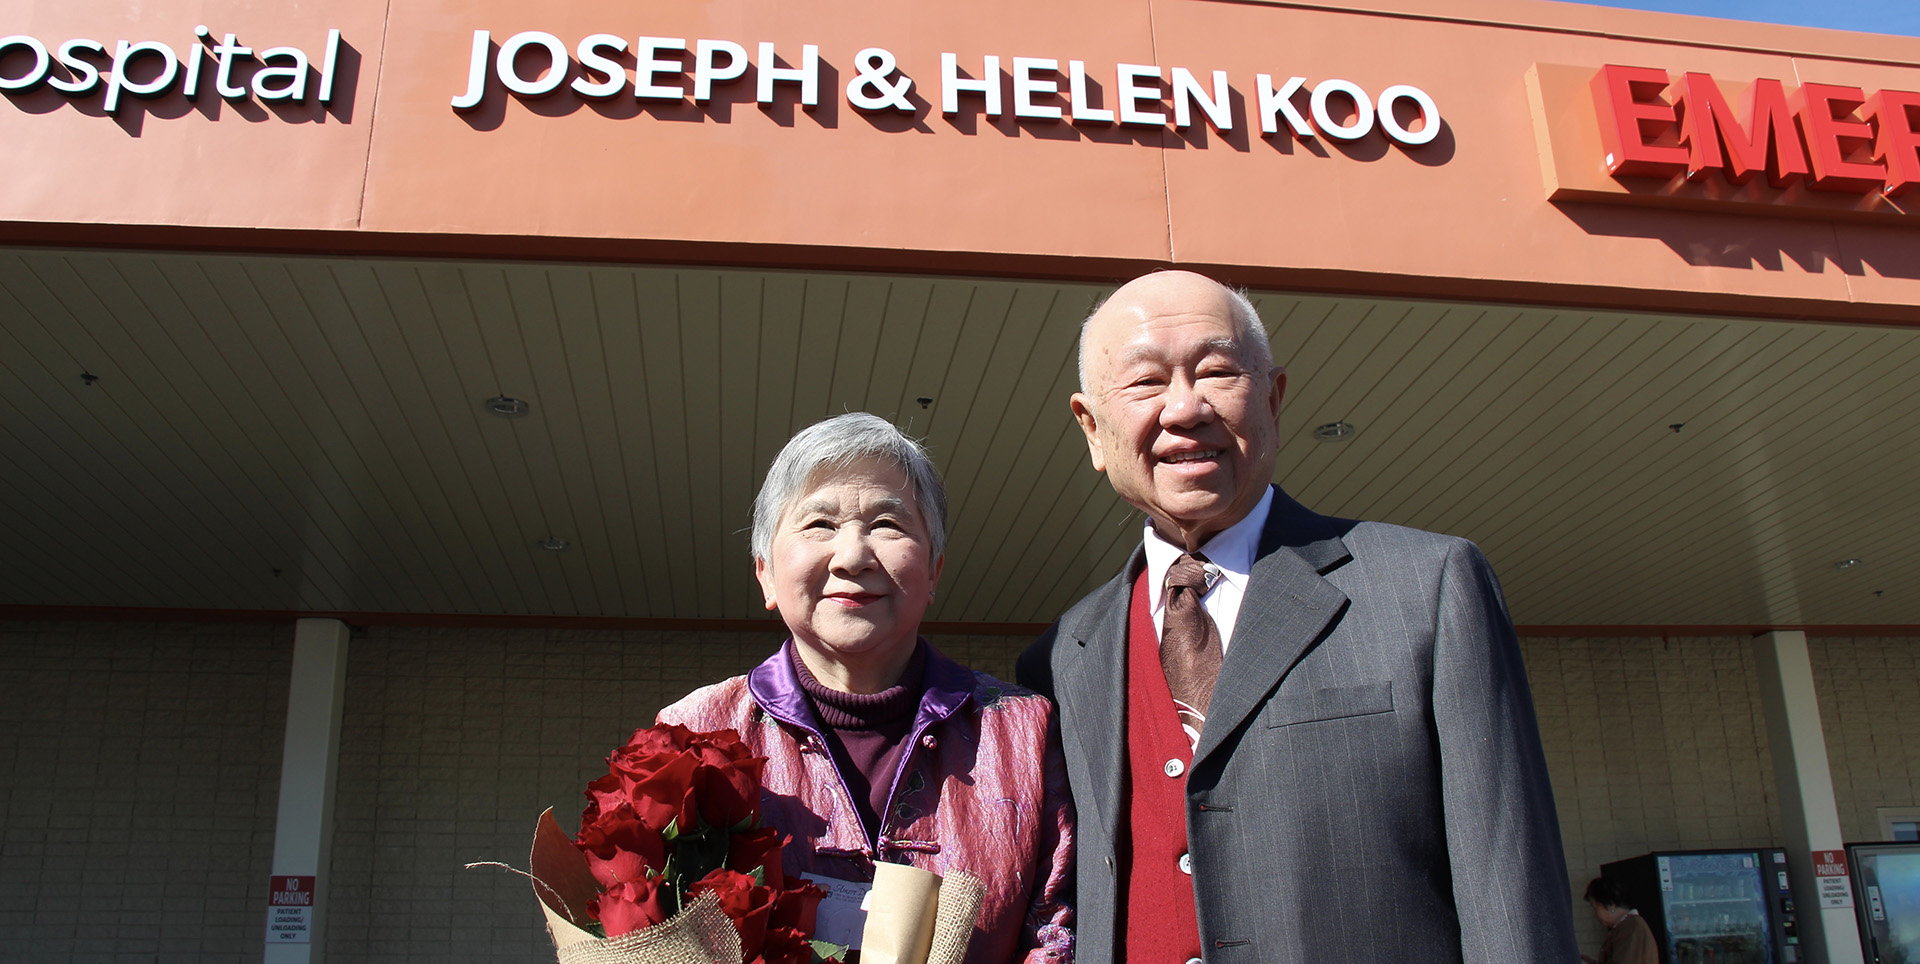 Mr. Joseph Loo and Dr. Helen Koo smile and pose under a sign with their names outside at the Emergency Room naming ceremony